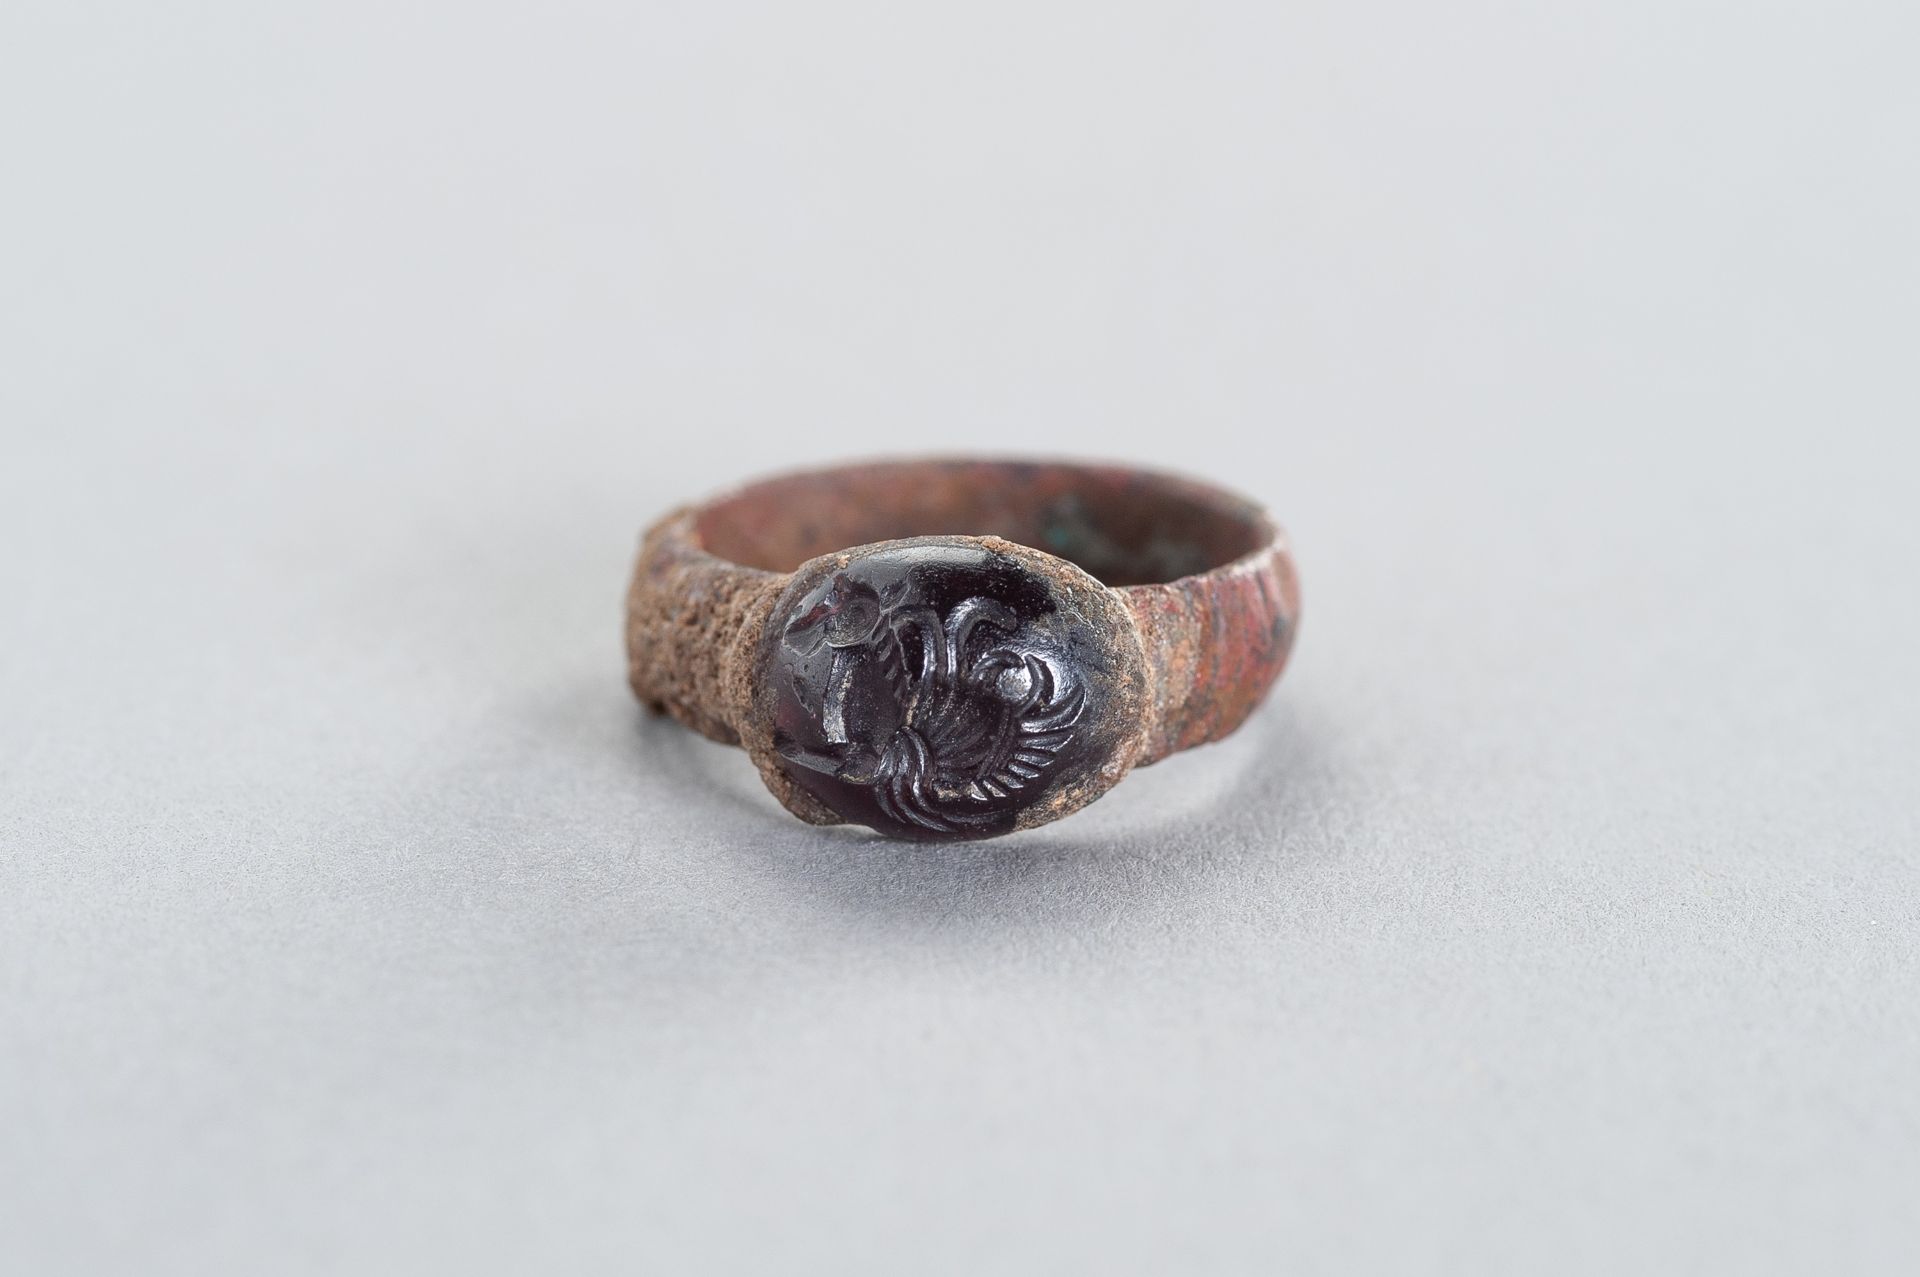 AN ANCIENT COPPER RING WITH AN INTAGLIO